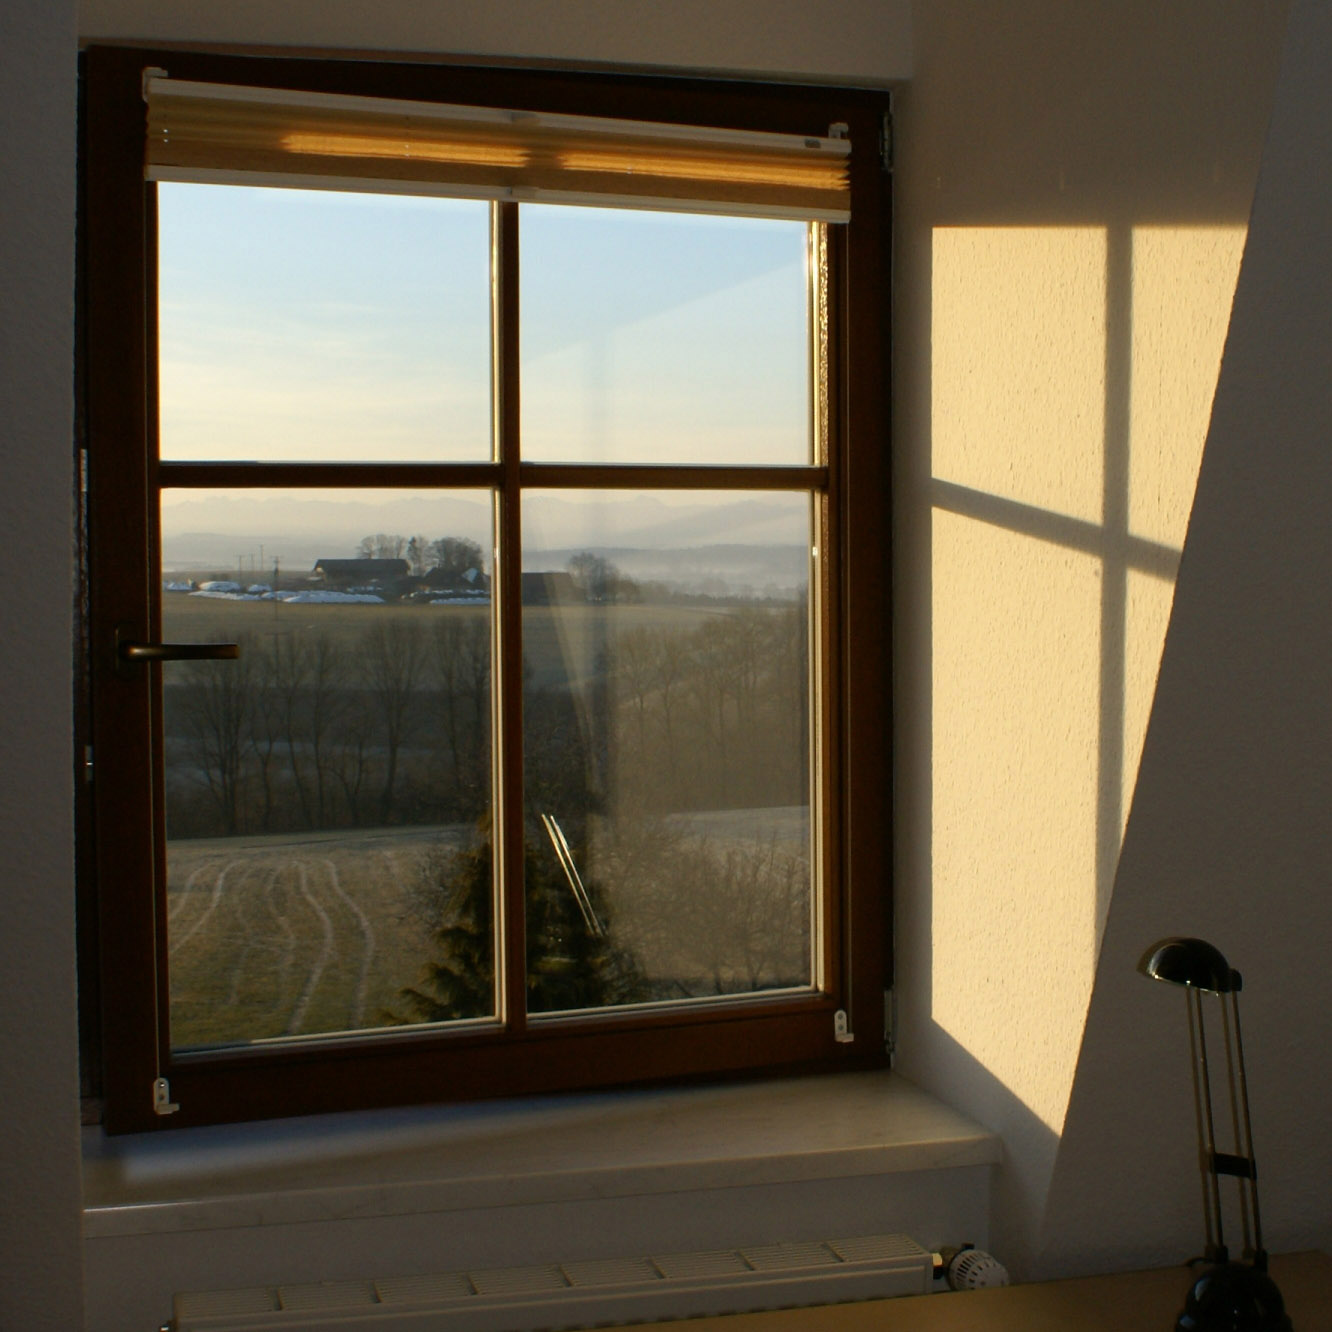 Natural Light is the Best Light that Can be Obtained with Upgrading Your Home Windows